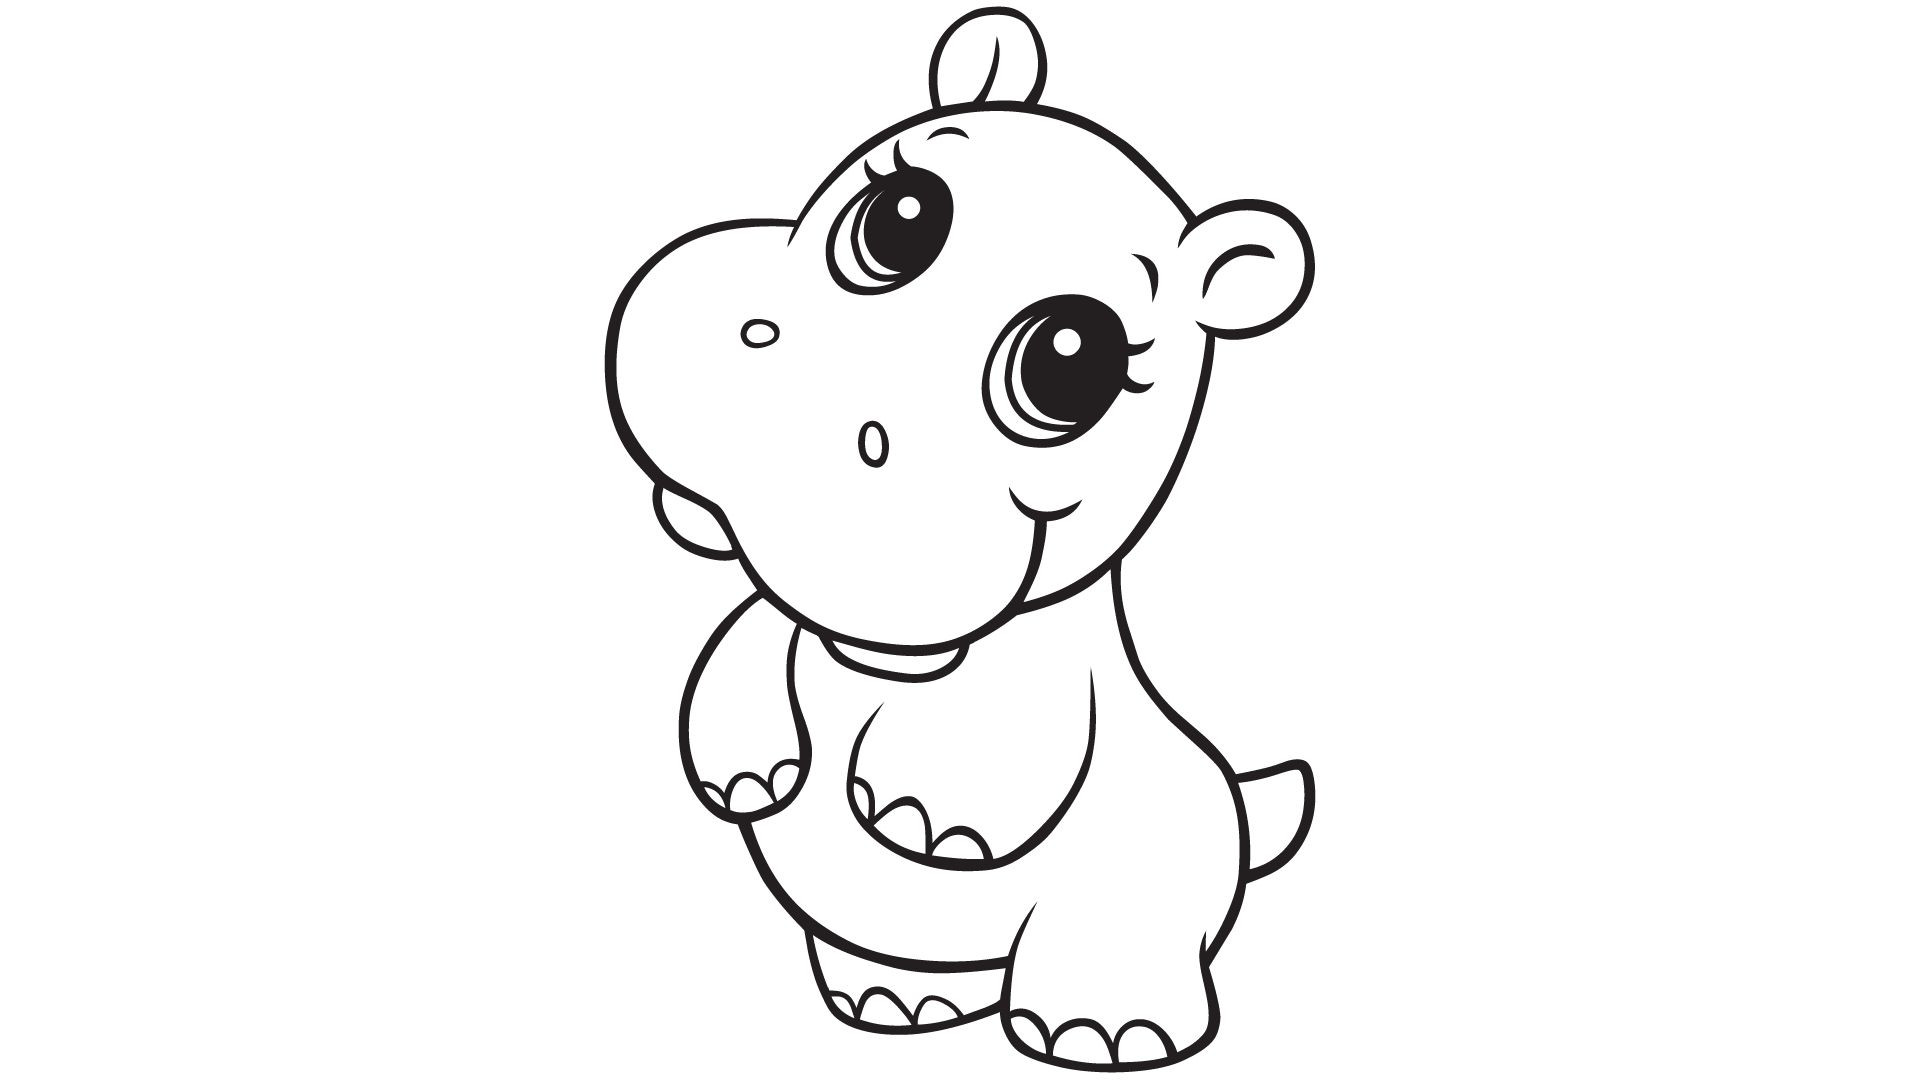 Free Printable Coloring Sheets Of Baby Animals With Big Eyes And Are Foxes
 Nos jeux de coloriage Hippopotame à imprimer gratuit